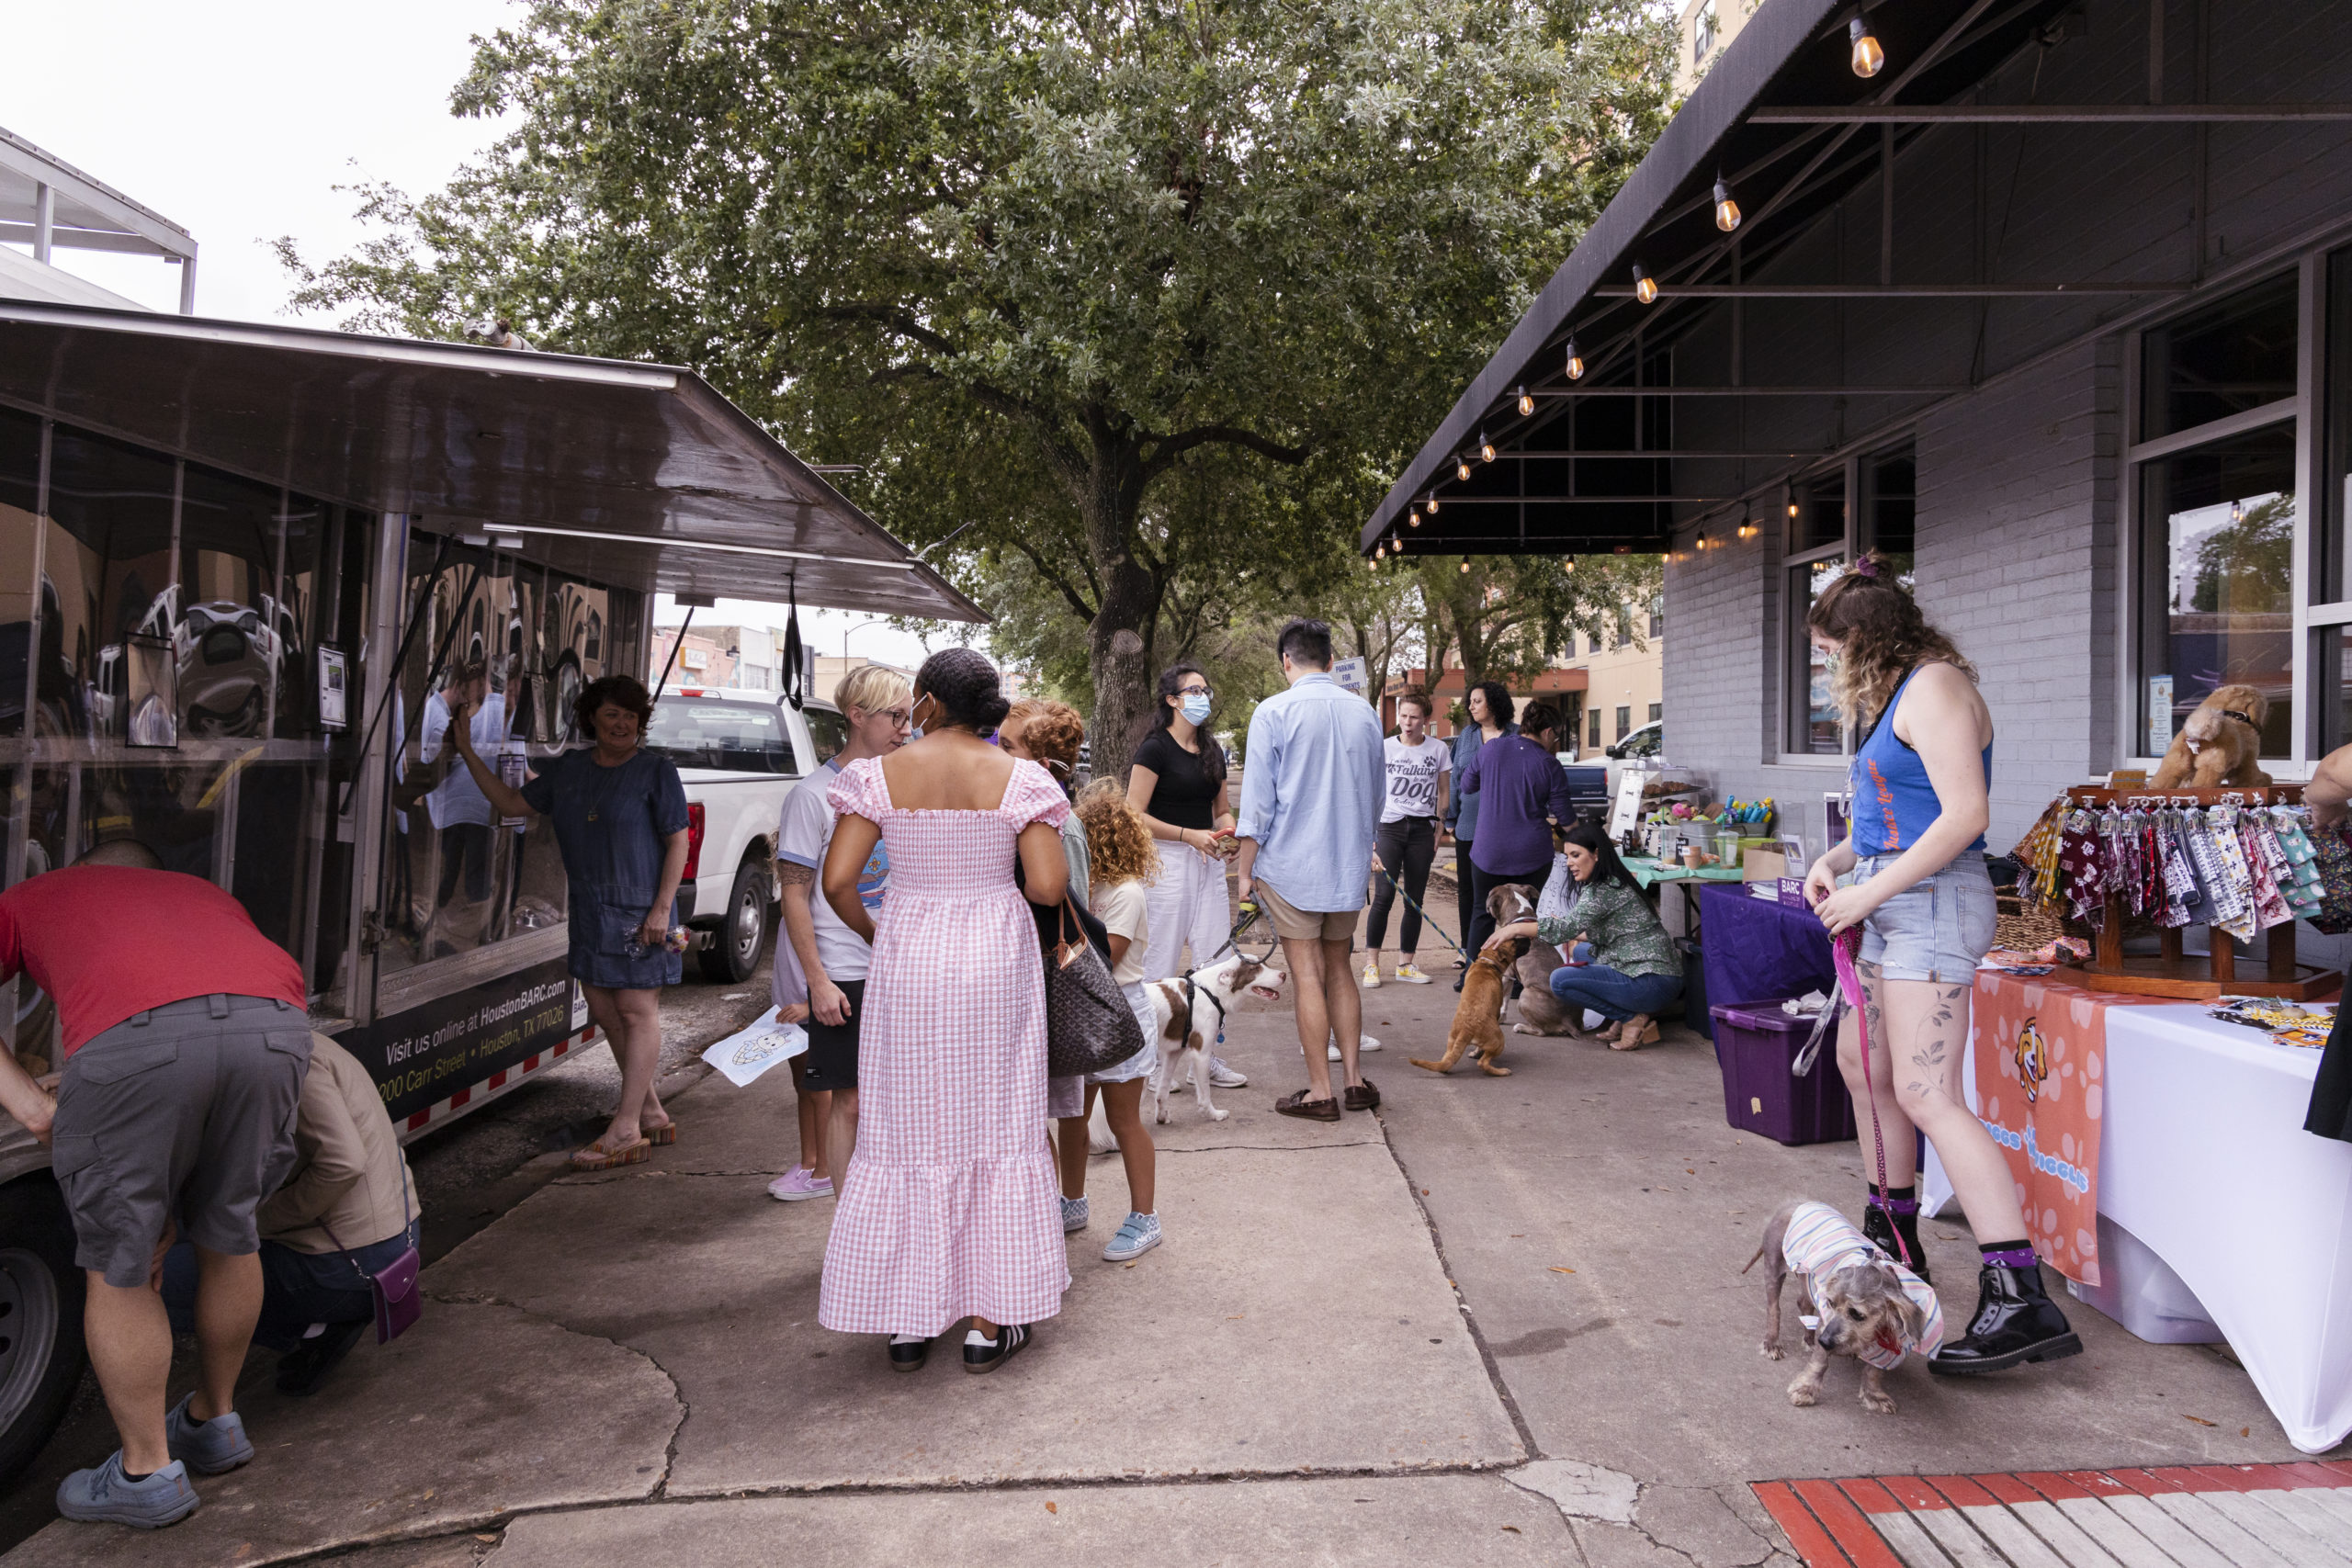 A crowd on the sidewalk for an event. People look inside of a mobile pet adoption vehicle.